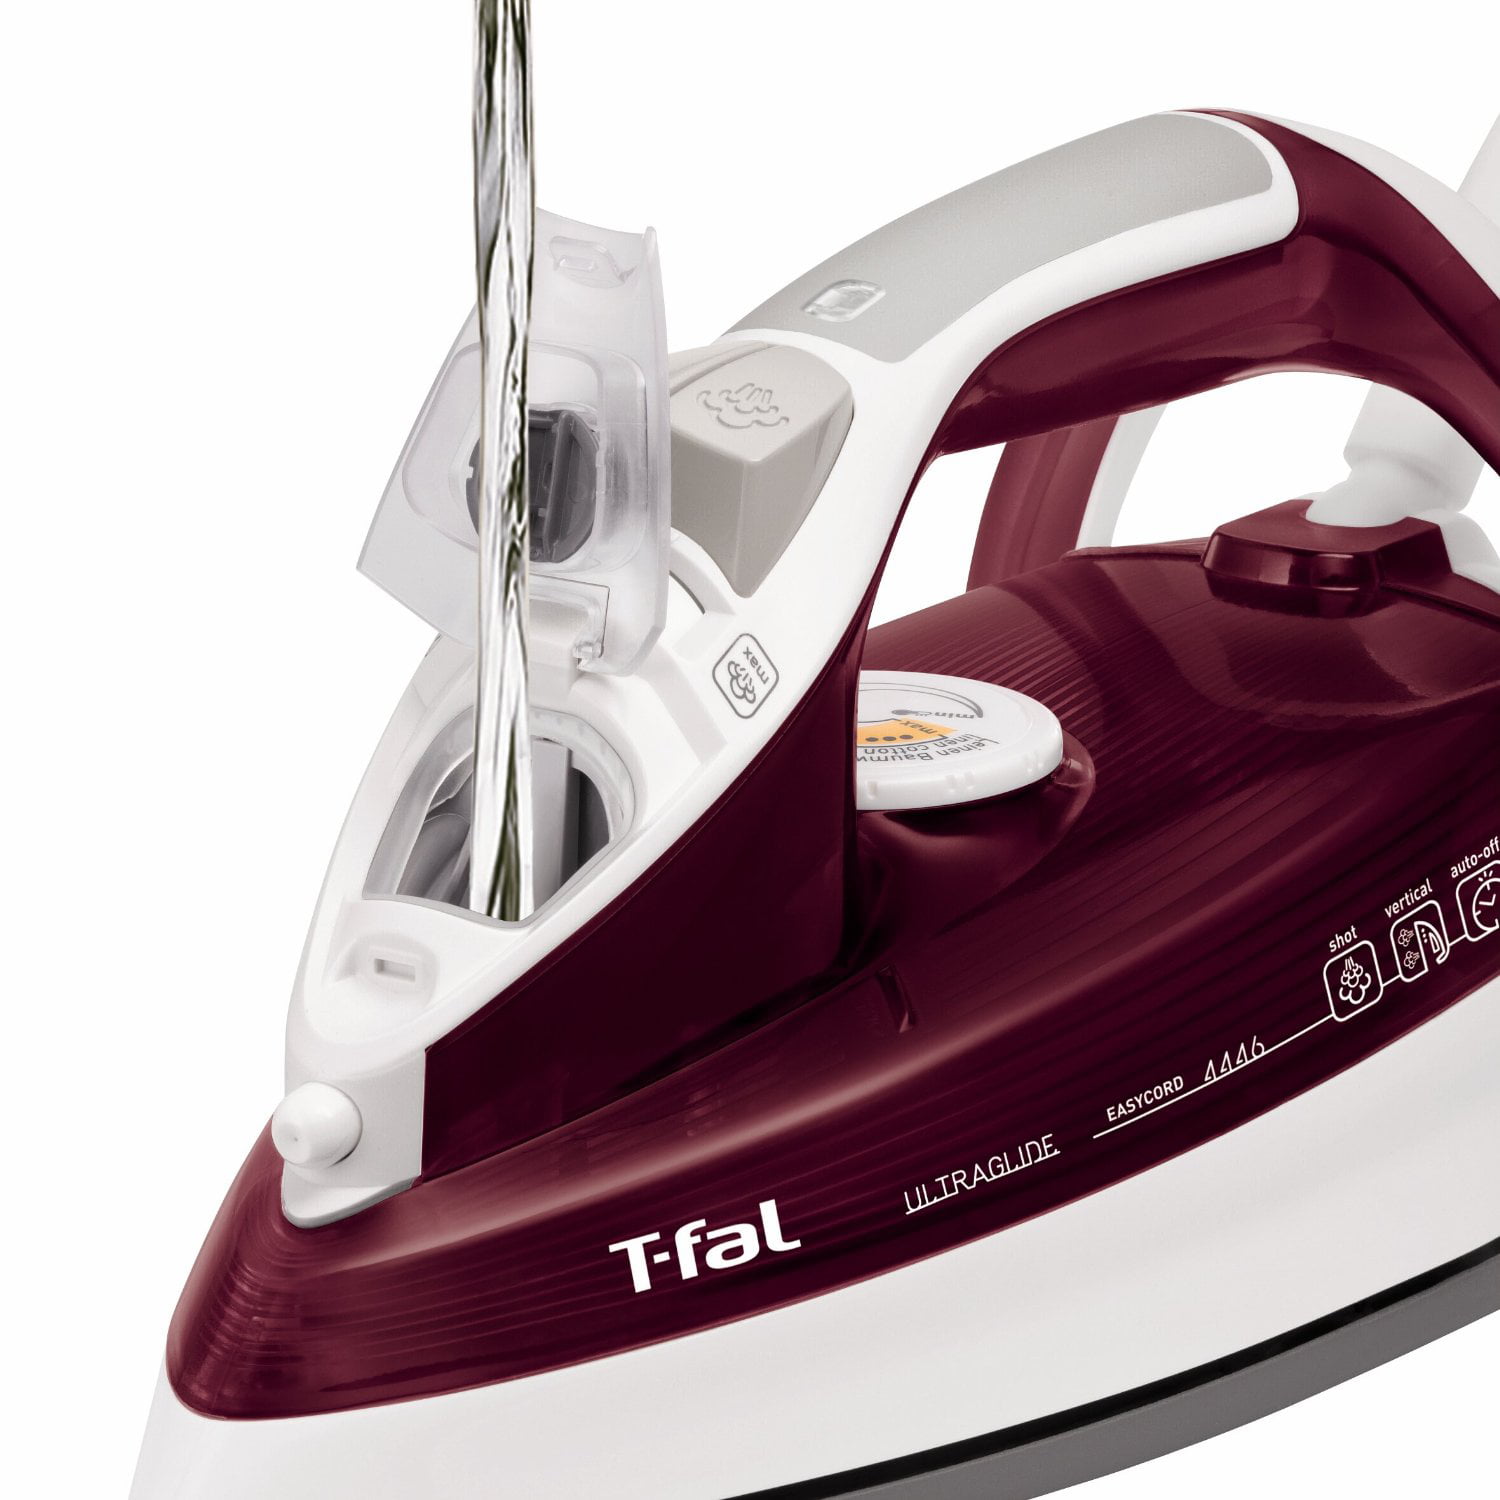 Non-Stick and Scratch Resistant T-Fal Ultraglide Pro Iron